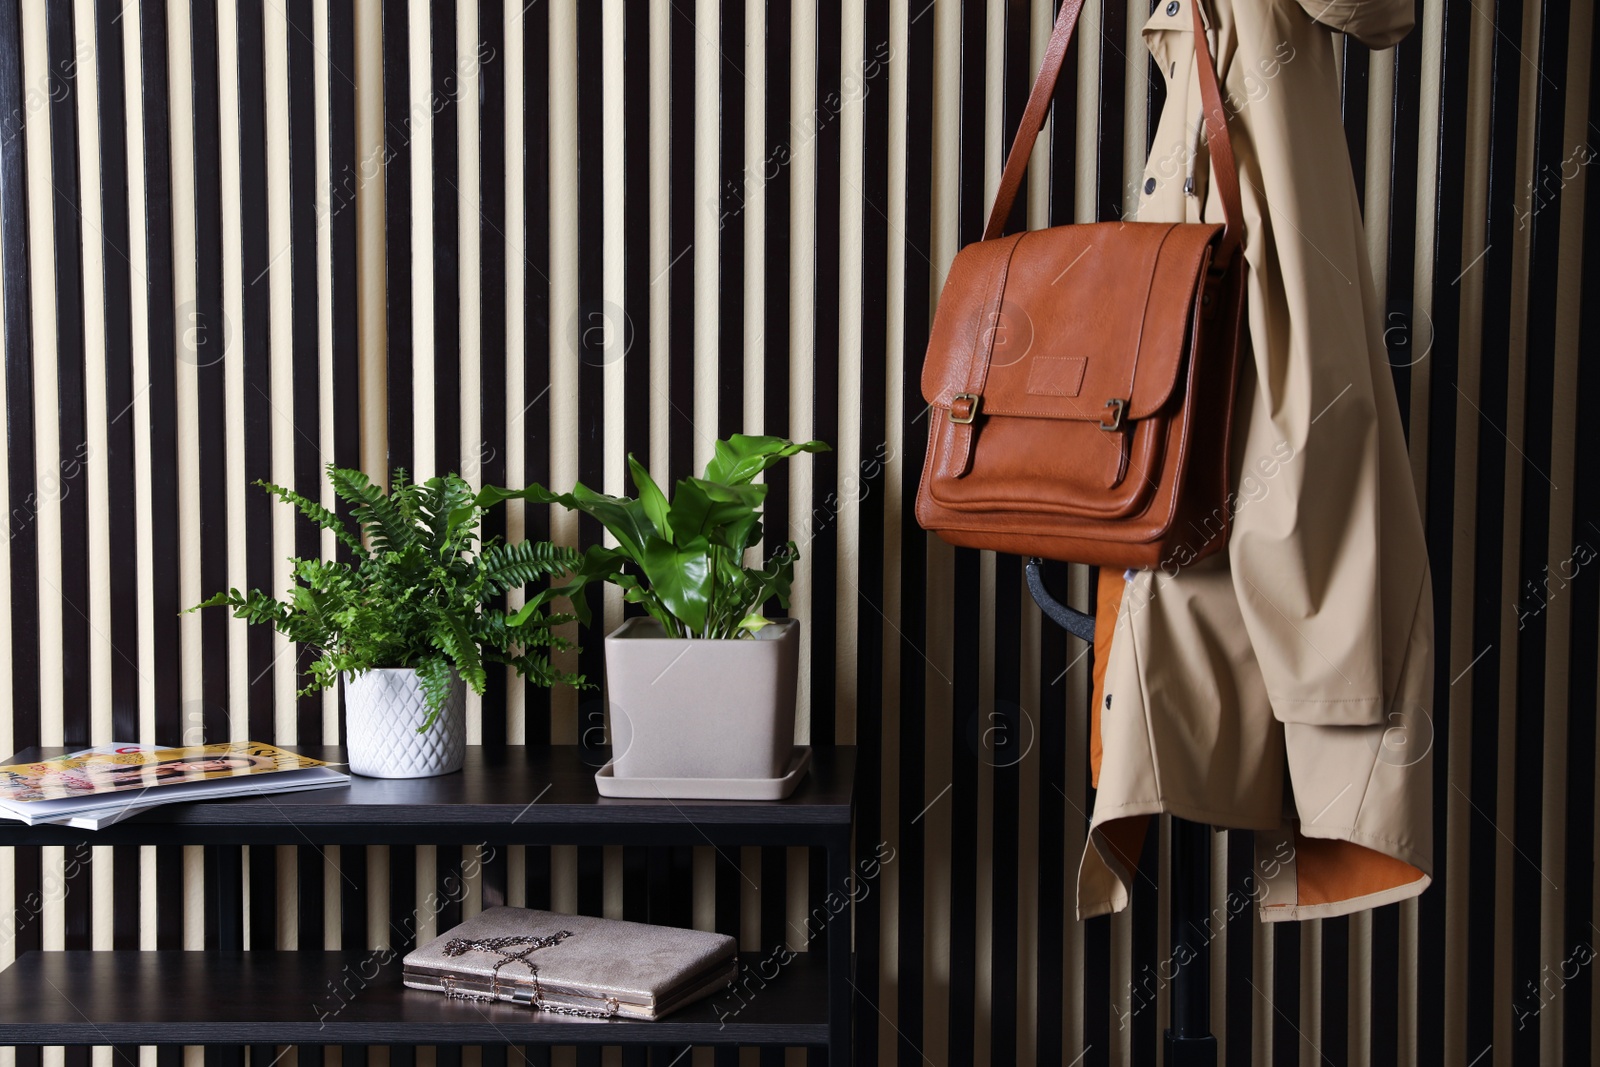 Photo of Beautiful ferns on table and clothes rack near striped wall